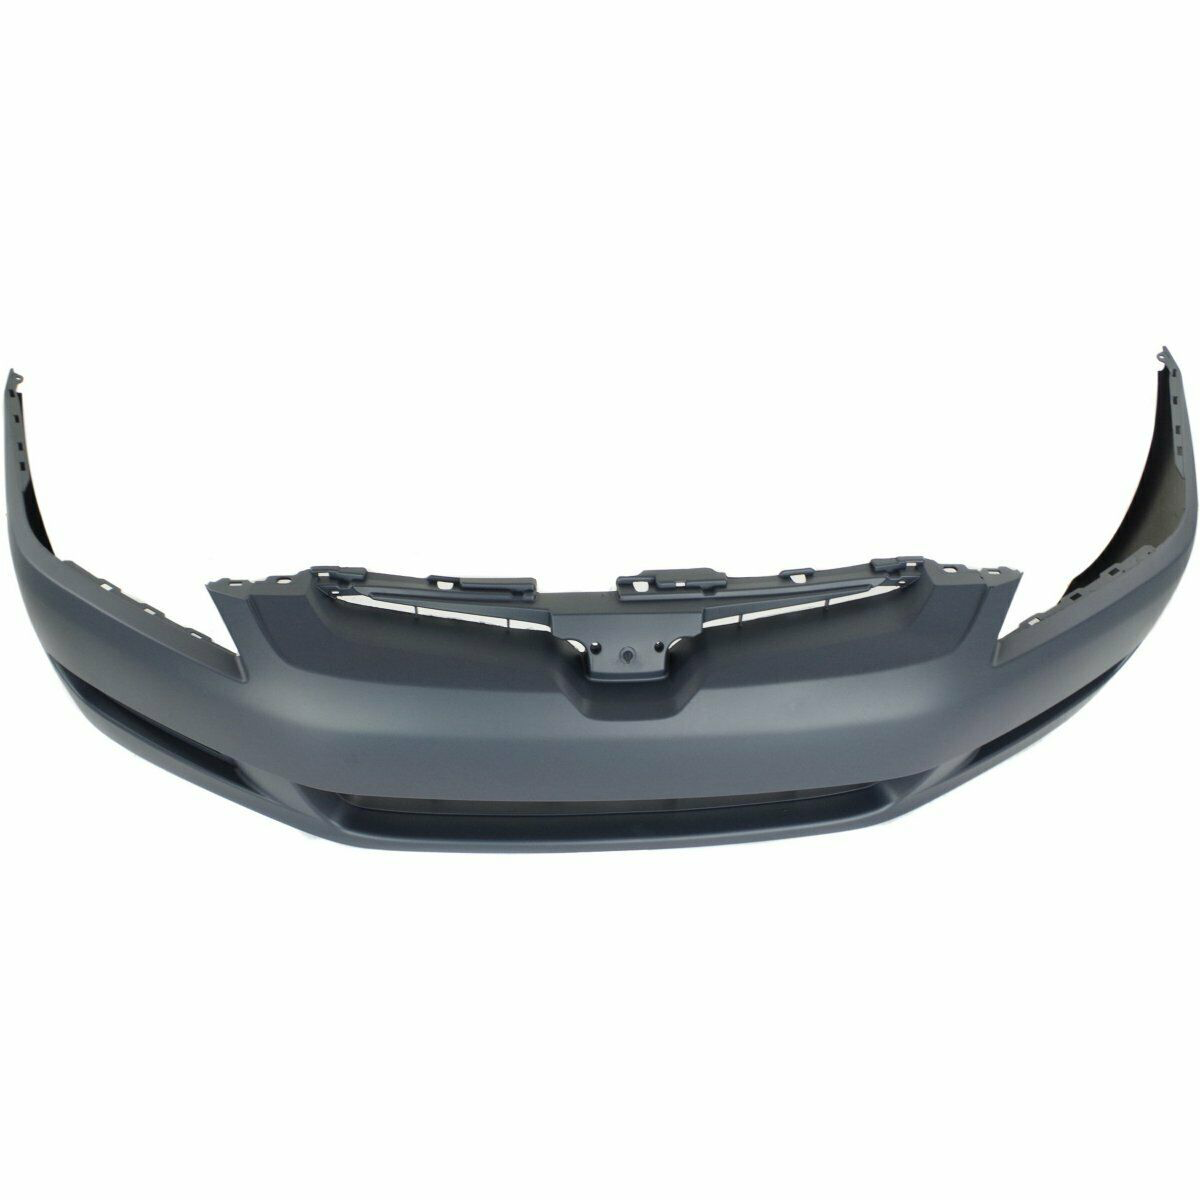 2003-2005 Honda Accord Coupe Front Bumper Painted to Match